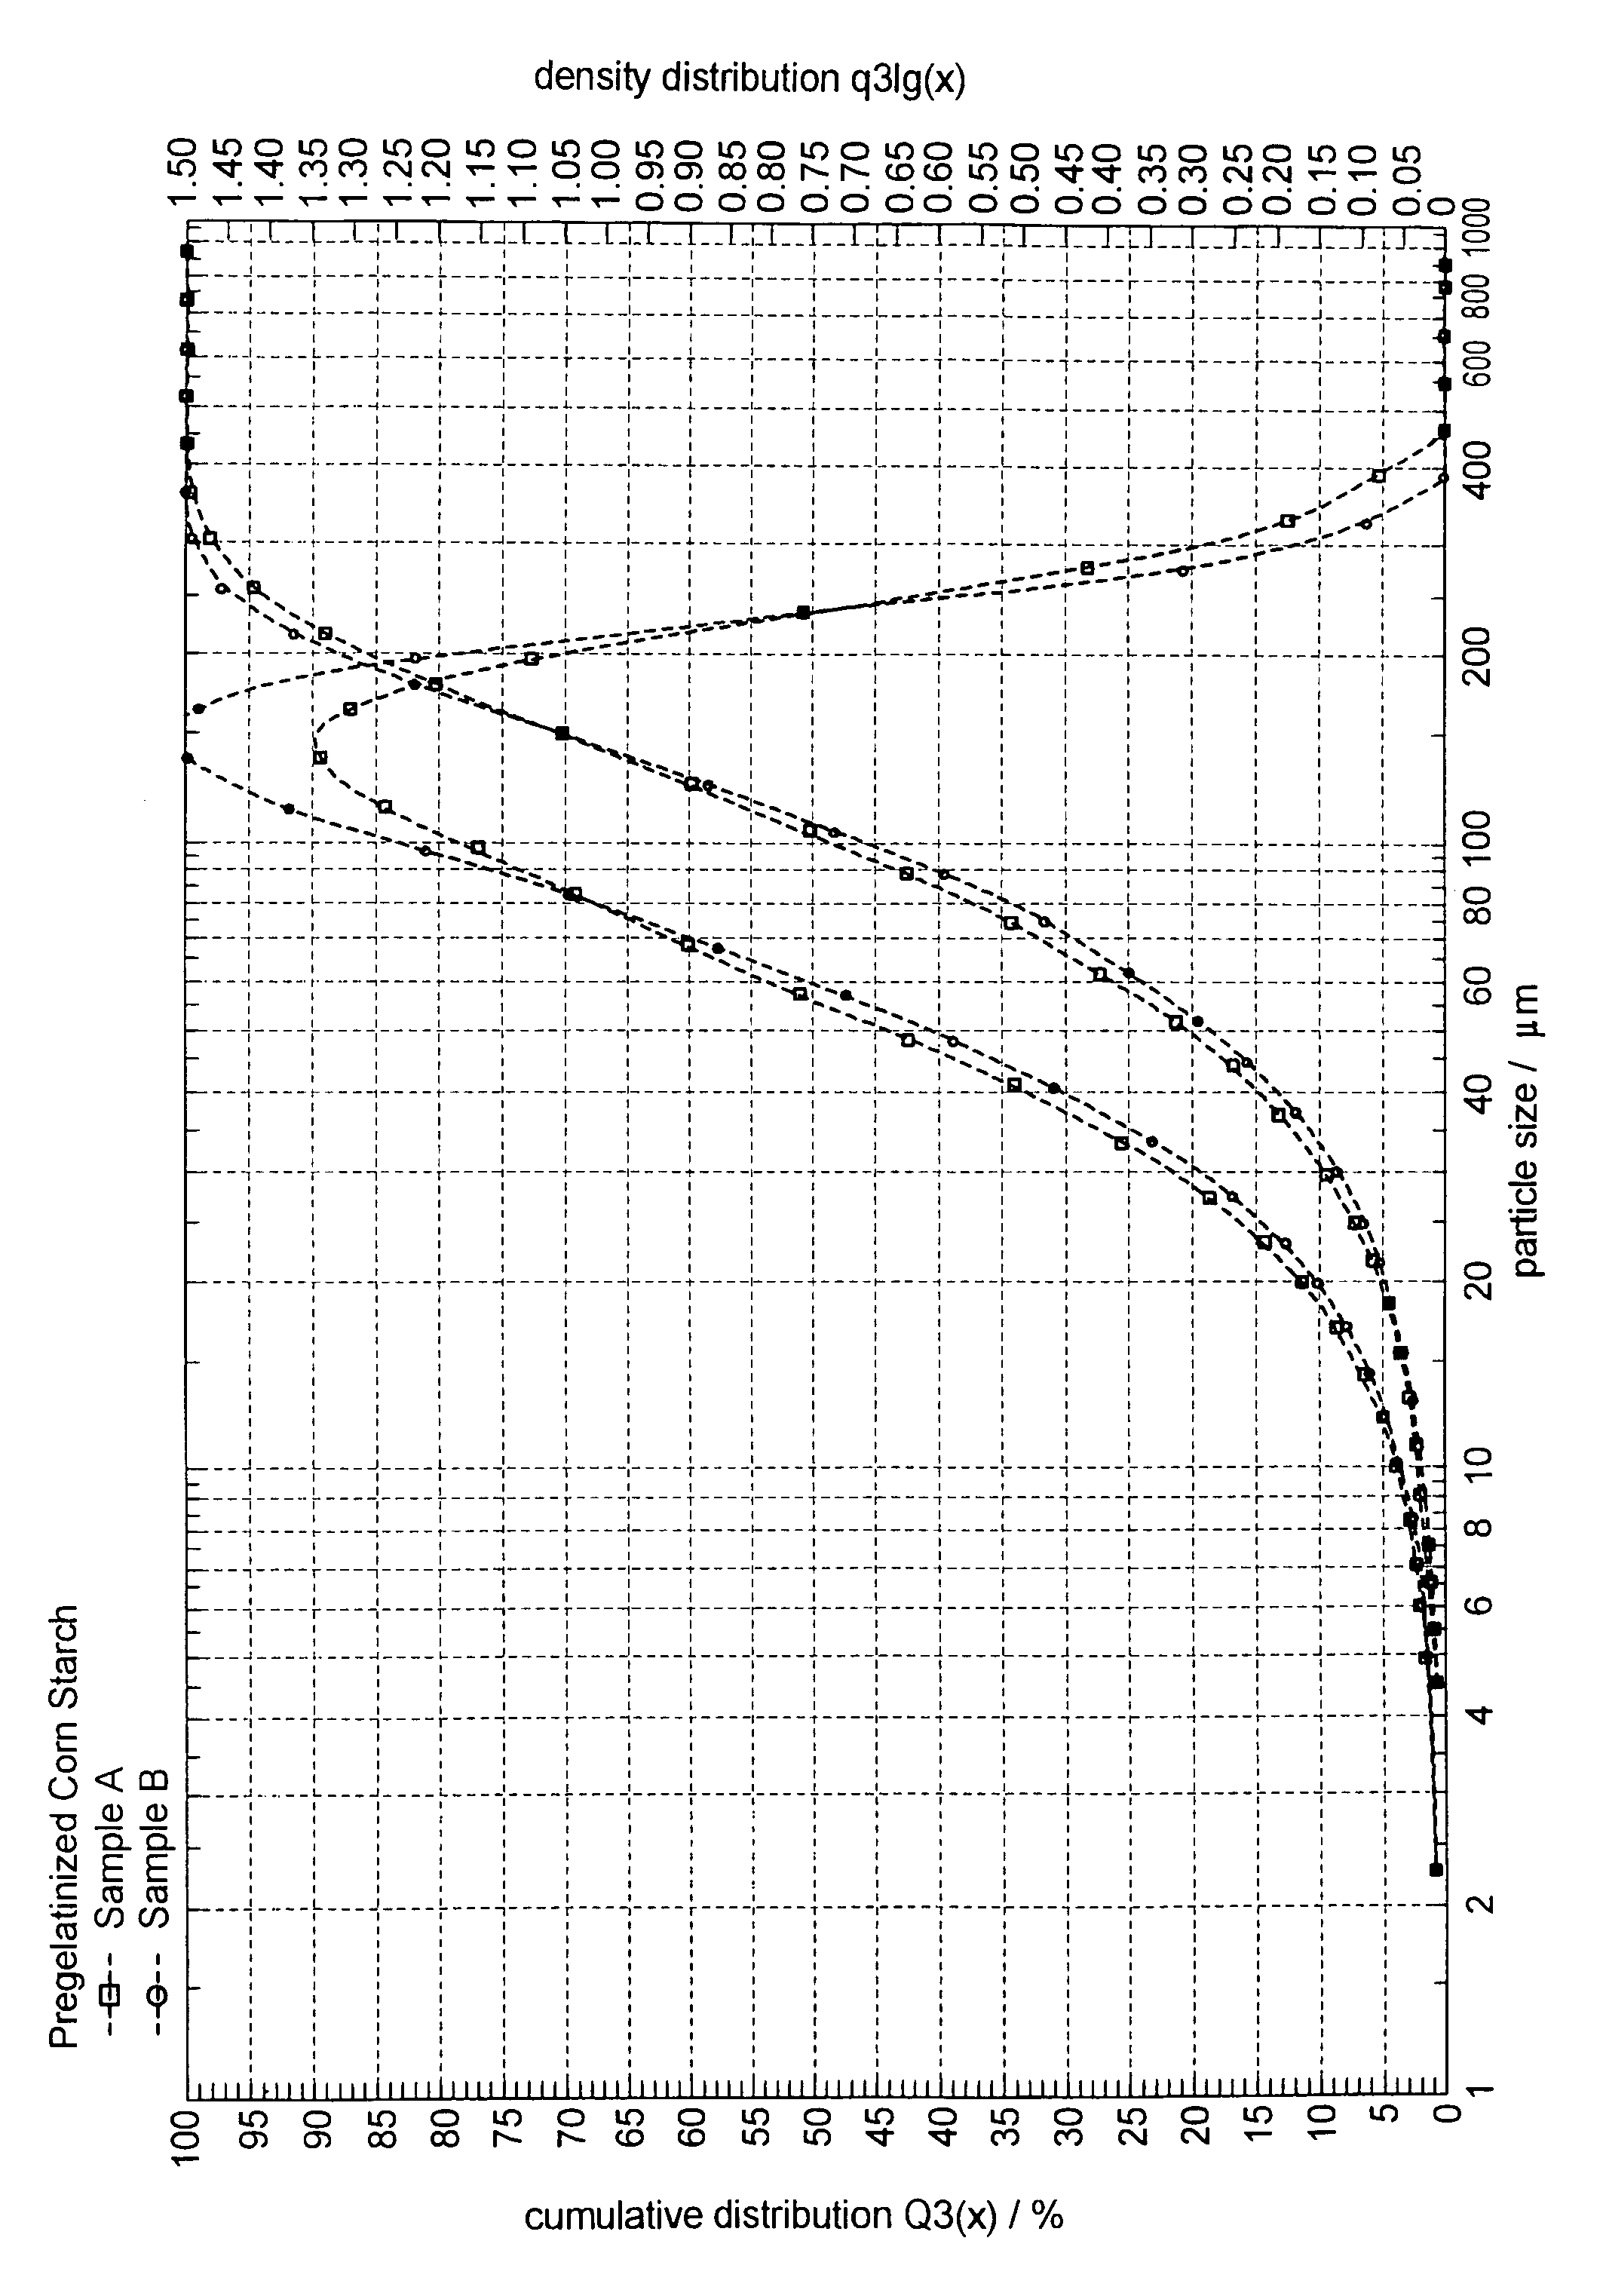 Method of water dispersing pregelatinized starch in making gypsum products